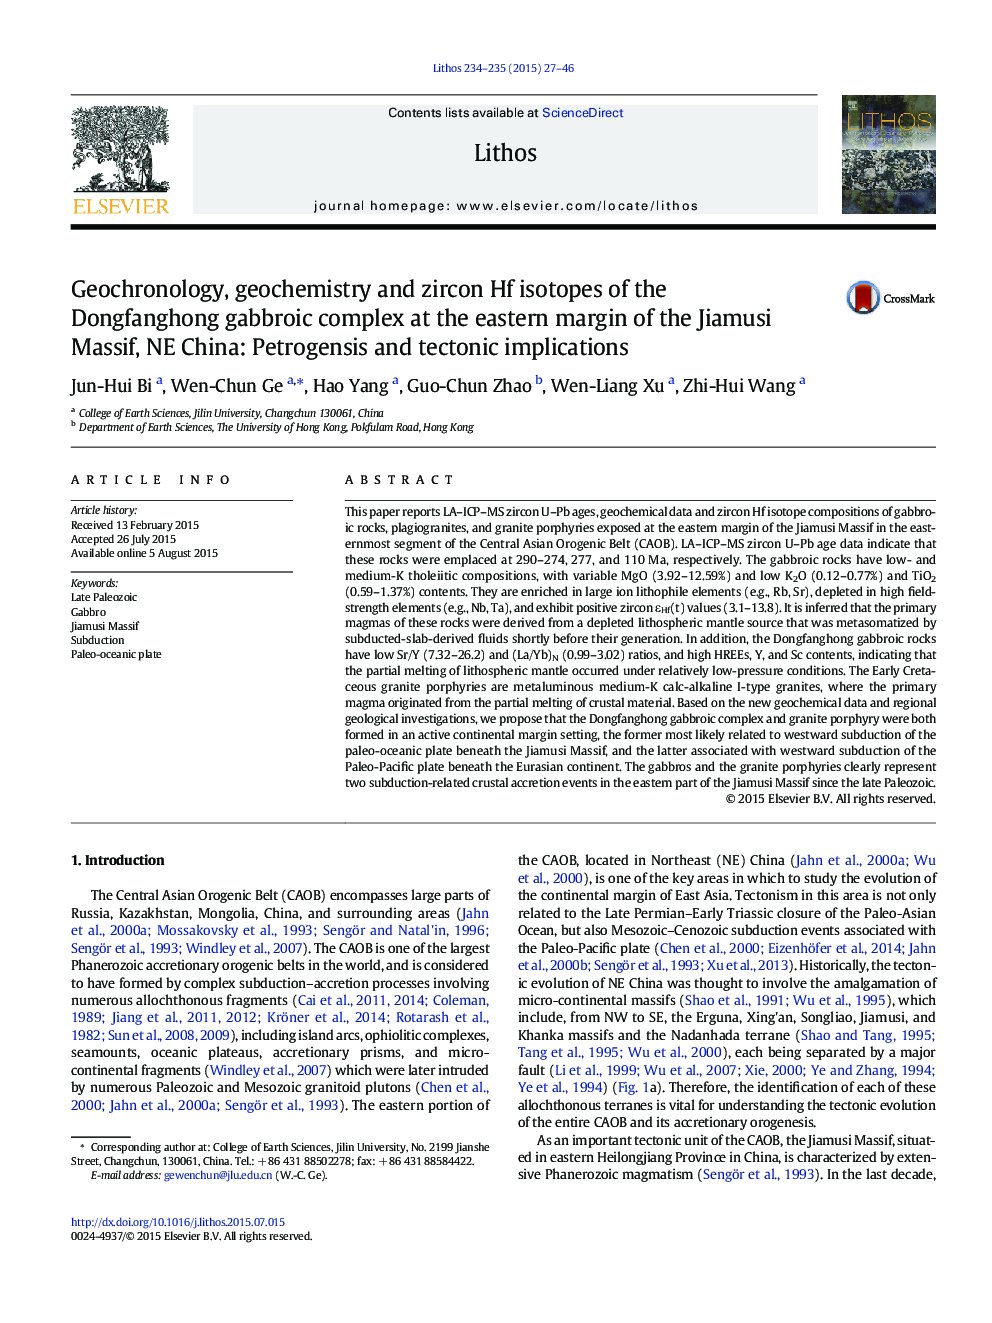 Geochronology, geochemistry and zircon Hf isotopes of the Dongfanghong gabbroic complex at the eastern margin of the Jiamusi Massif, NE China: Petrogensis and tectonic implications